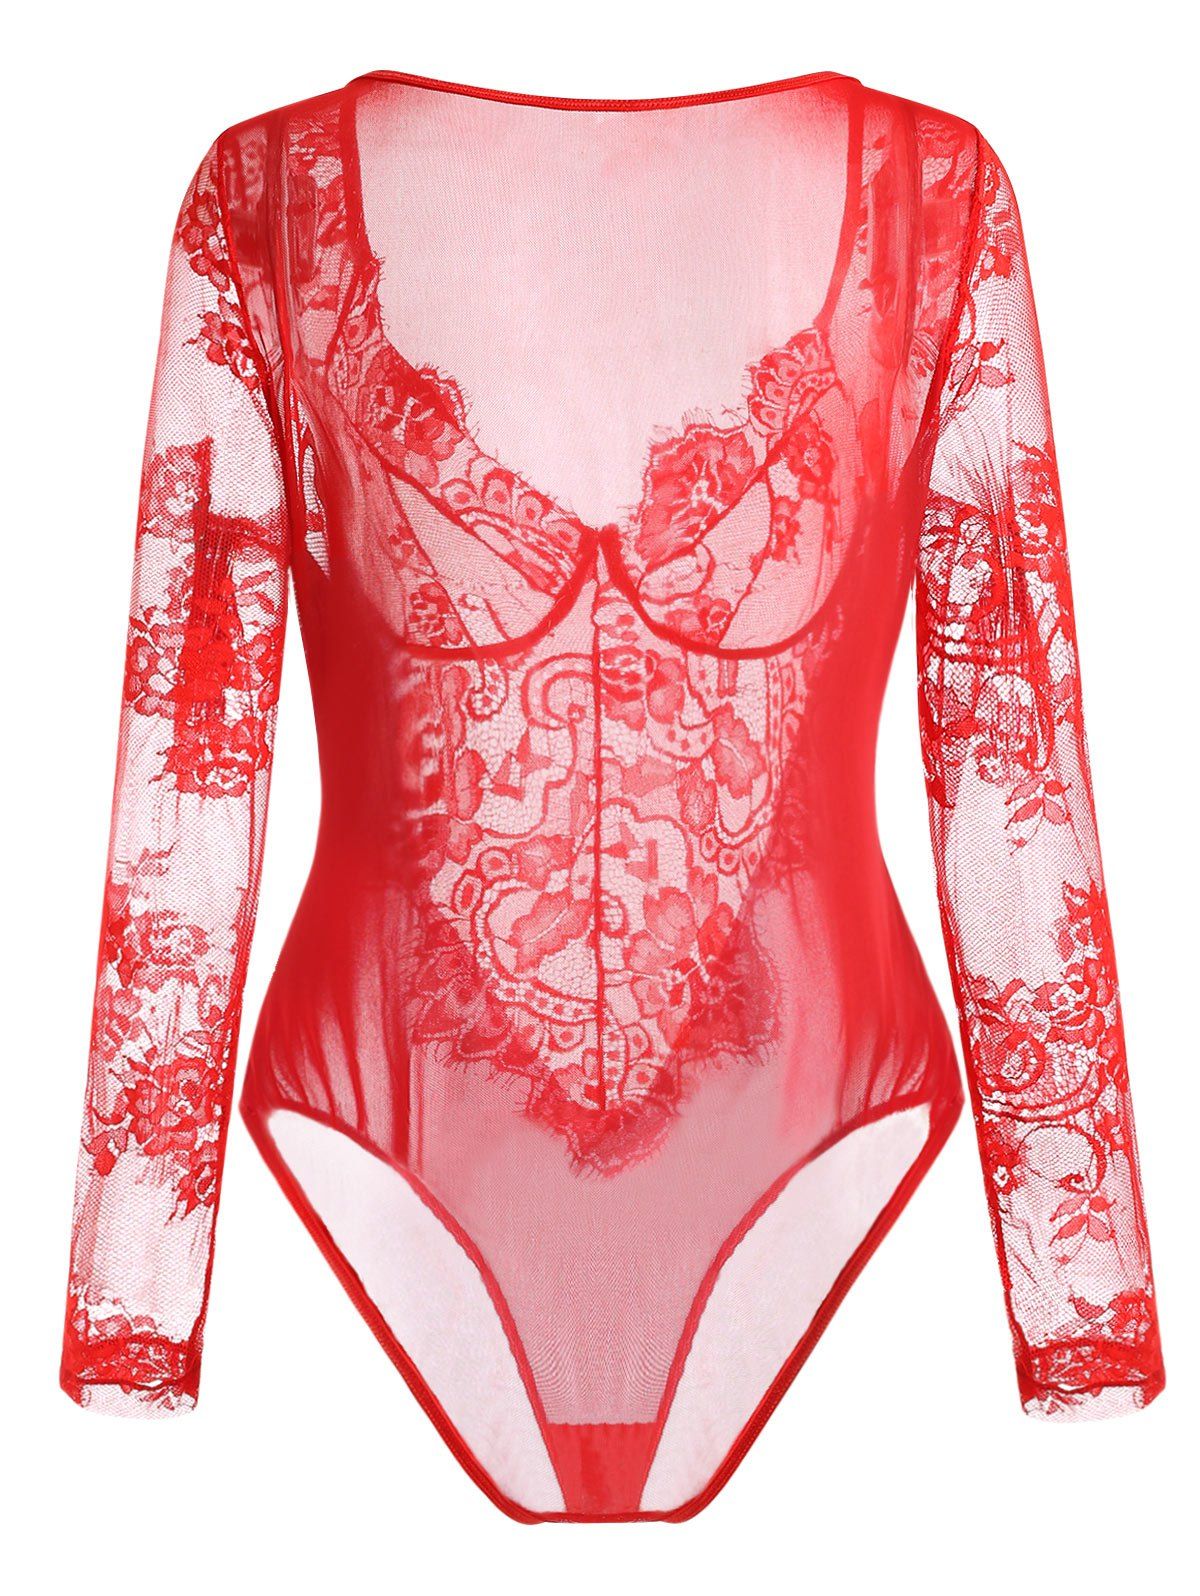 Off Plus Size See Thru Flower Lace Lingerie Teddy In Red Dresslily